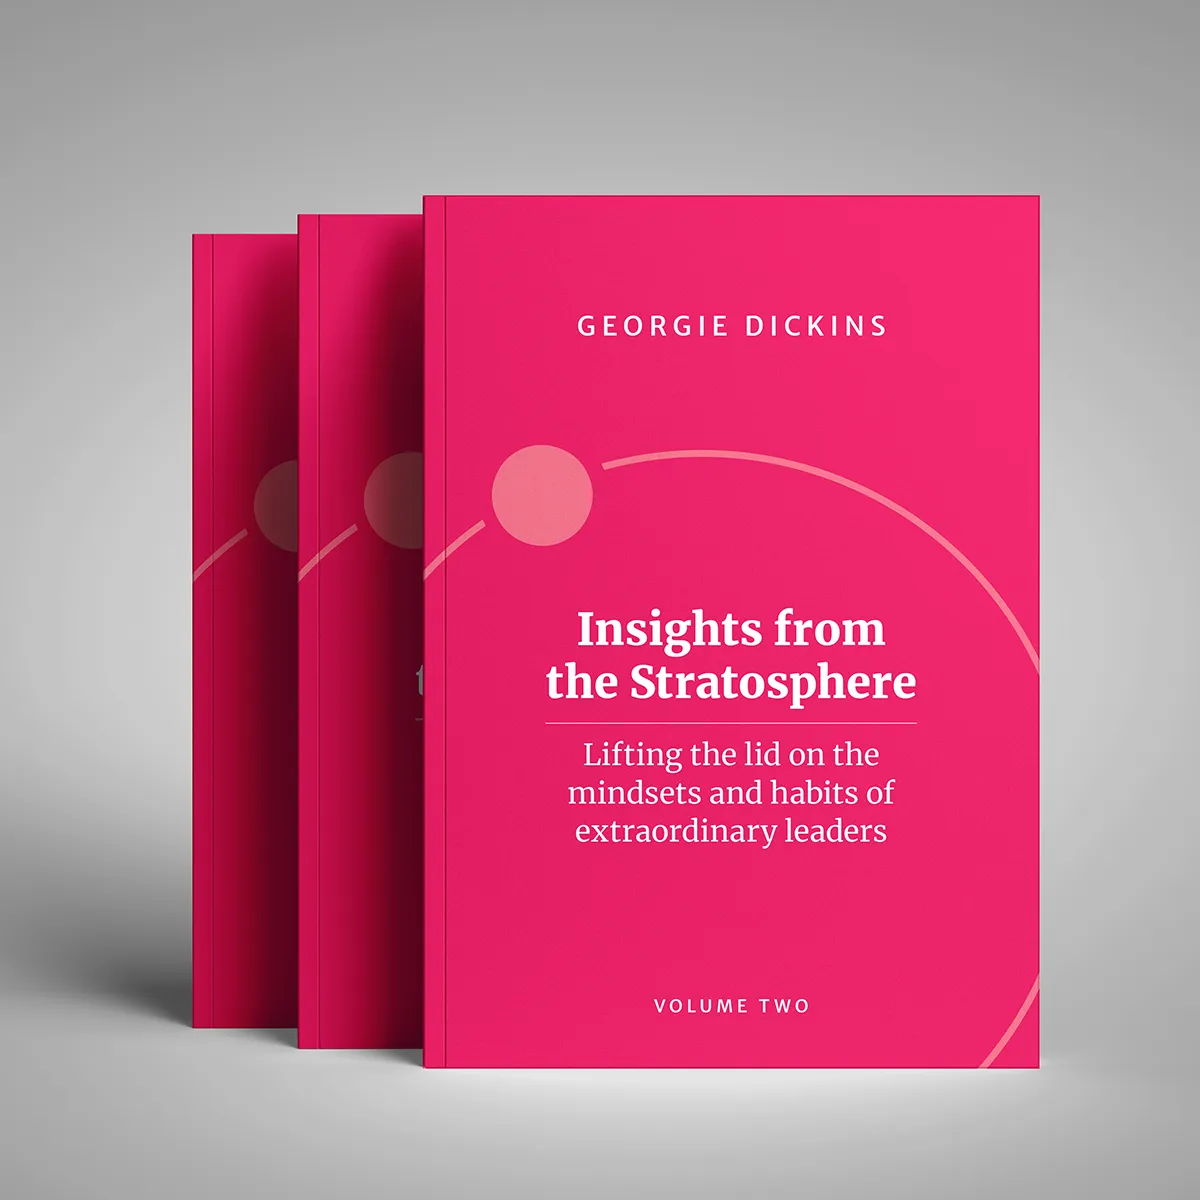 Book cover design and typesetting for 'Insights from the Stratosphere' (Volume 2)' by Georgie Dickins